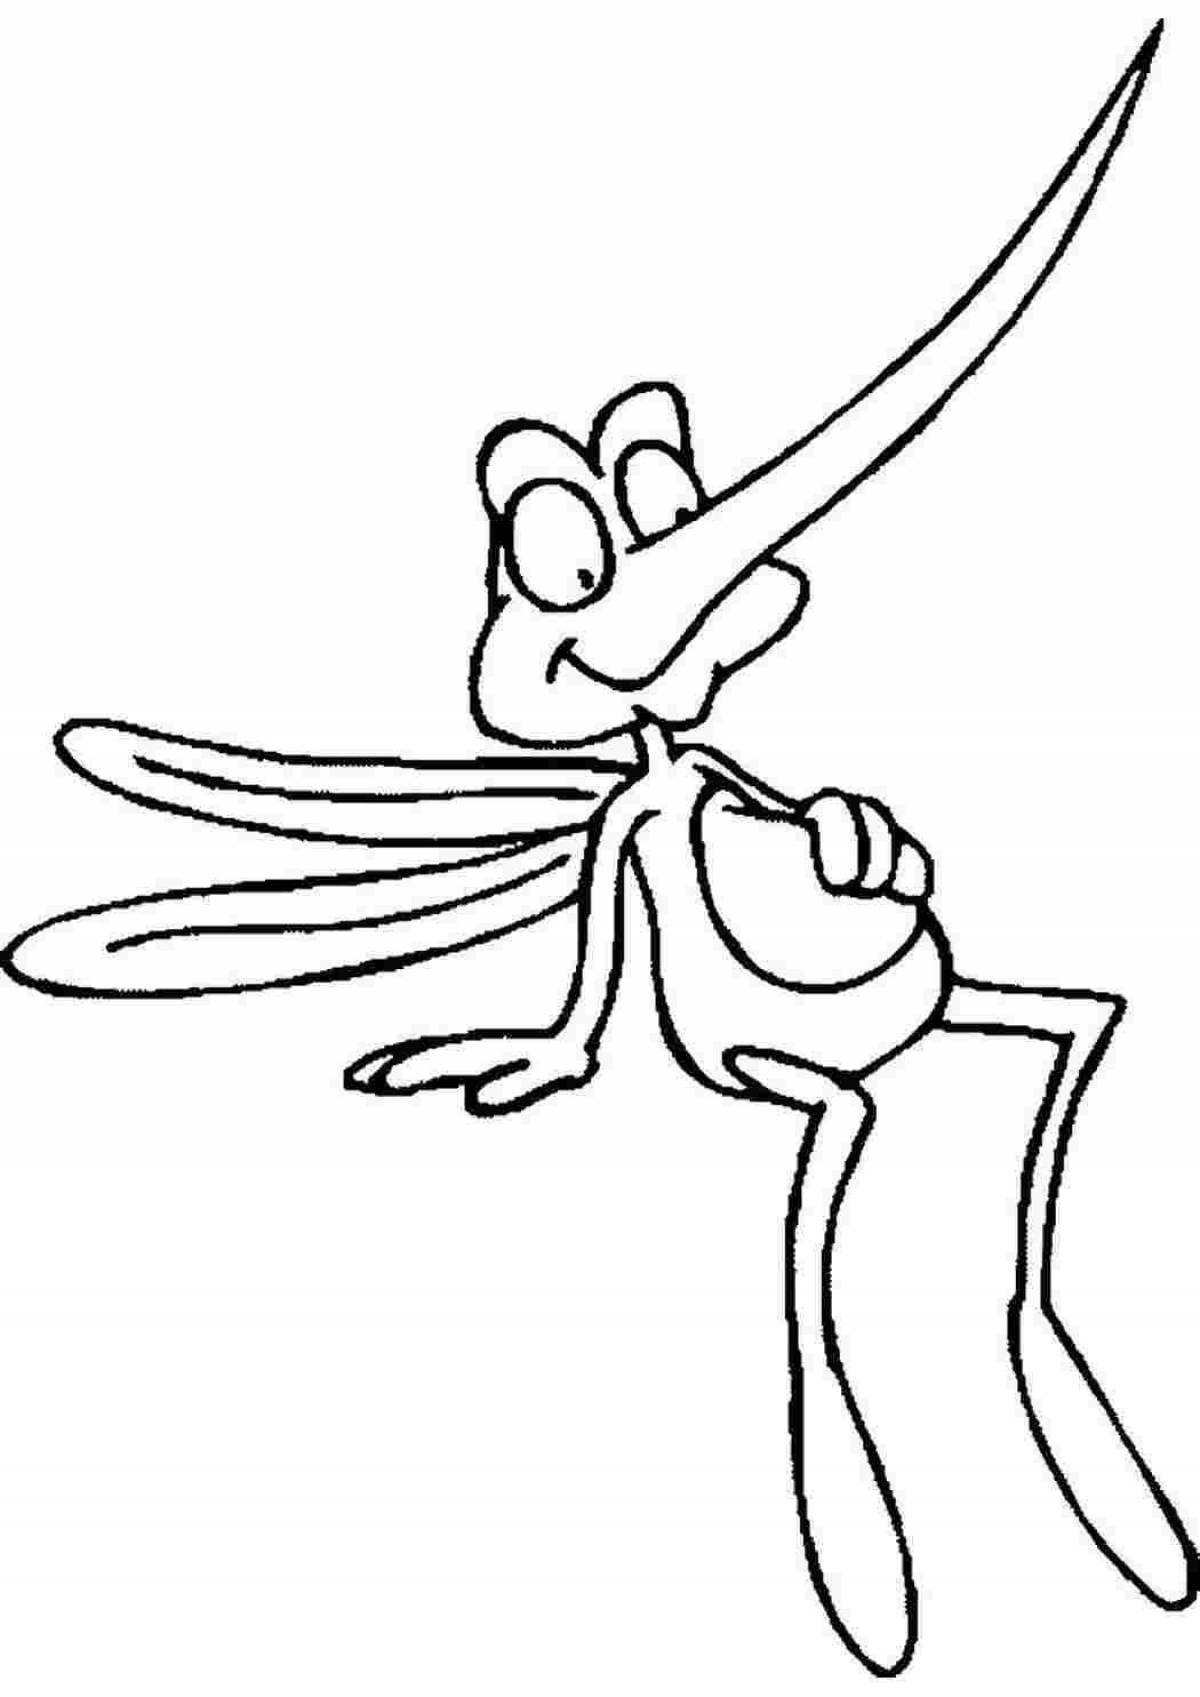 Colorful mosquito coloring page